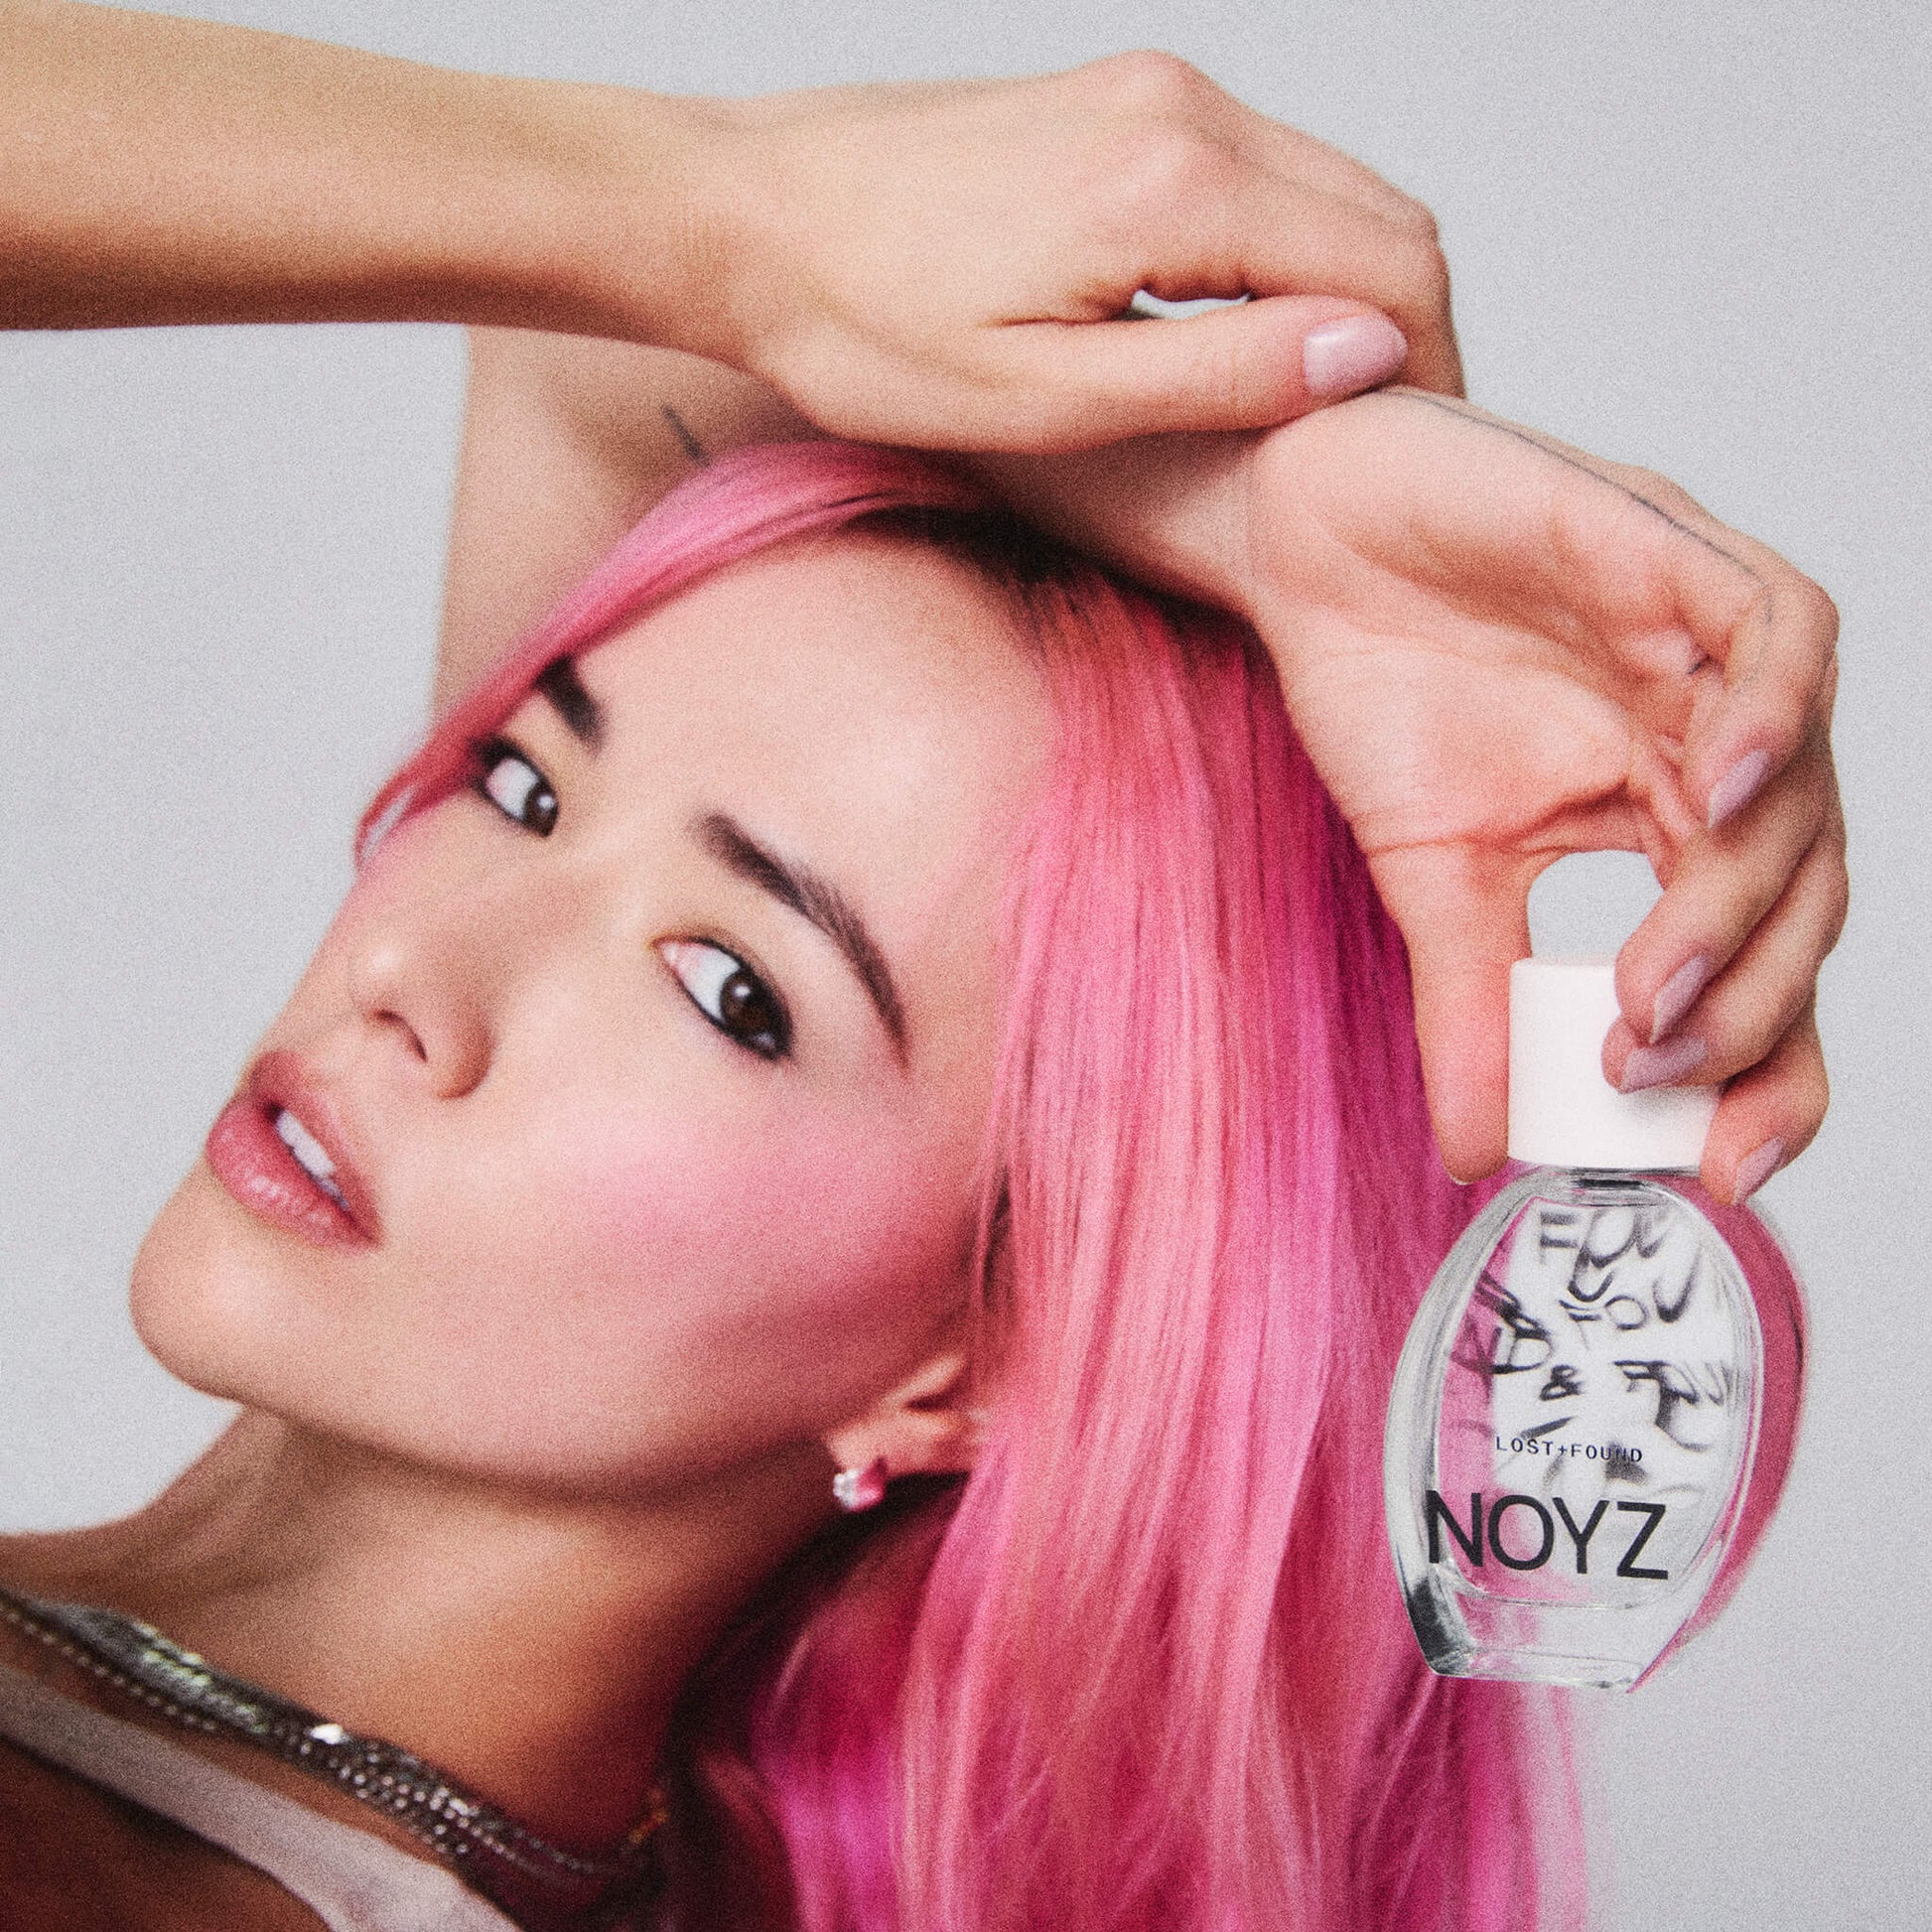 Close up photo of a woman with pink hair holding a bottle of Lost + Found by NOYZ fragrance.